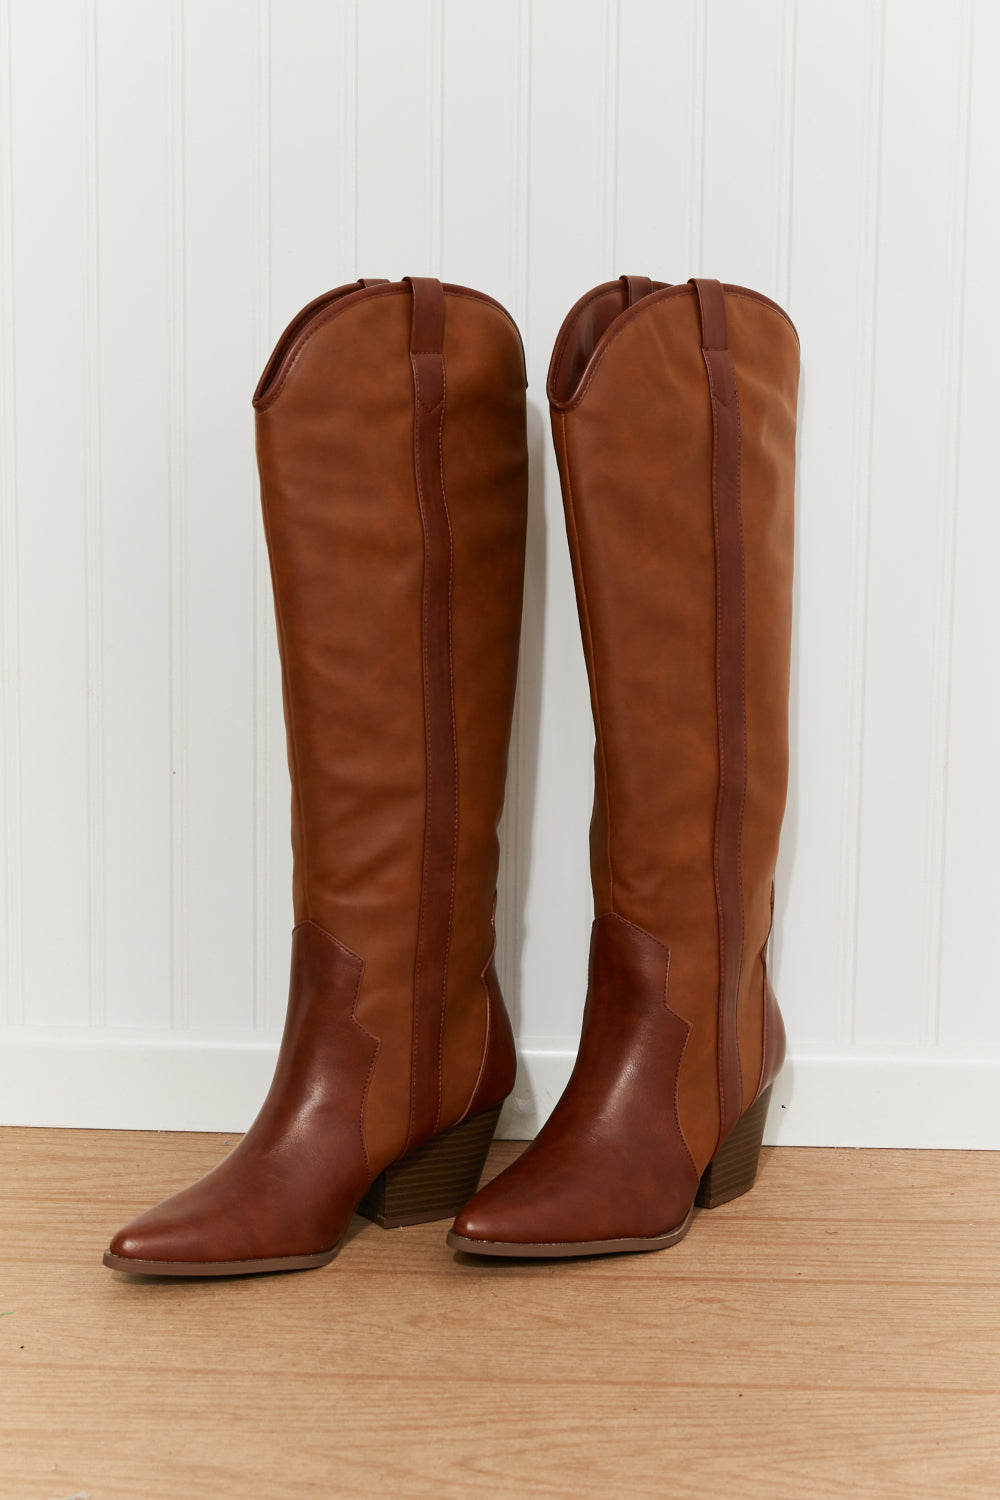 Qupid Countryside Contrast Knee High Cowboy Boots